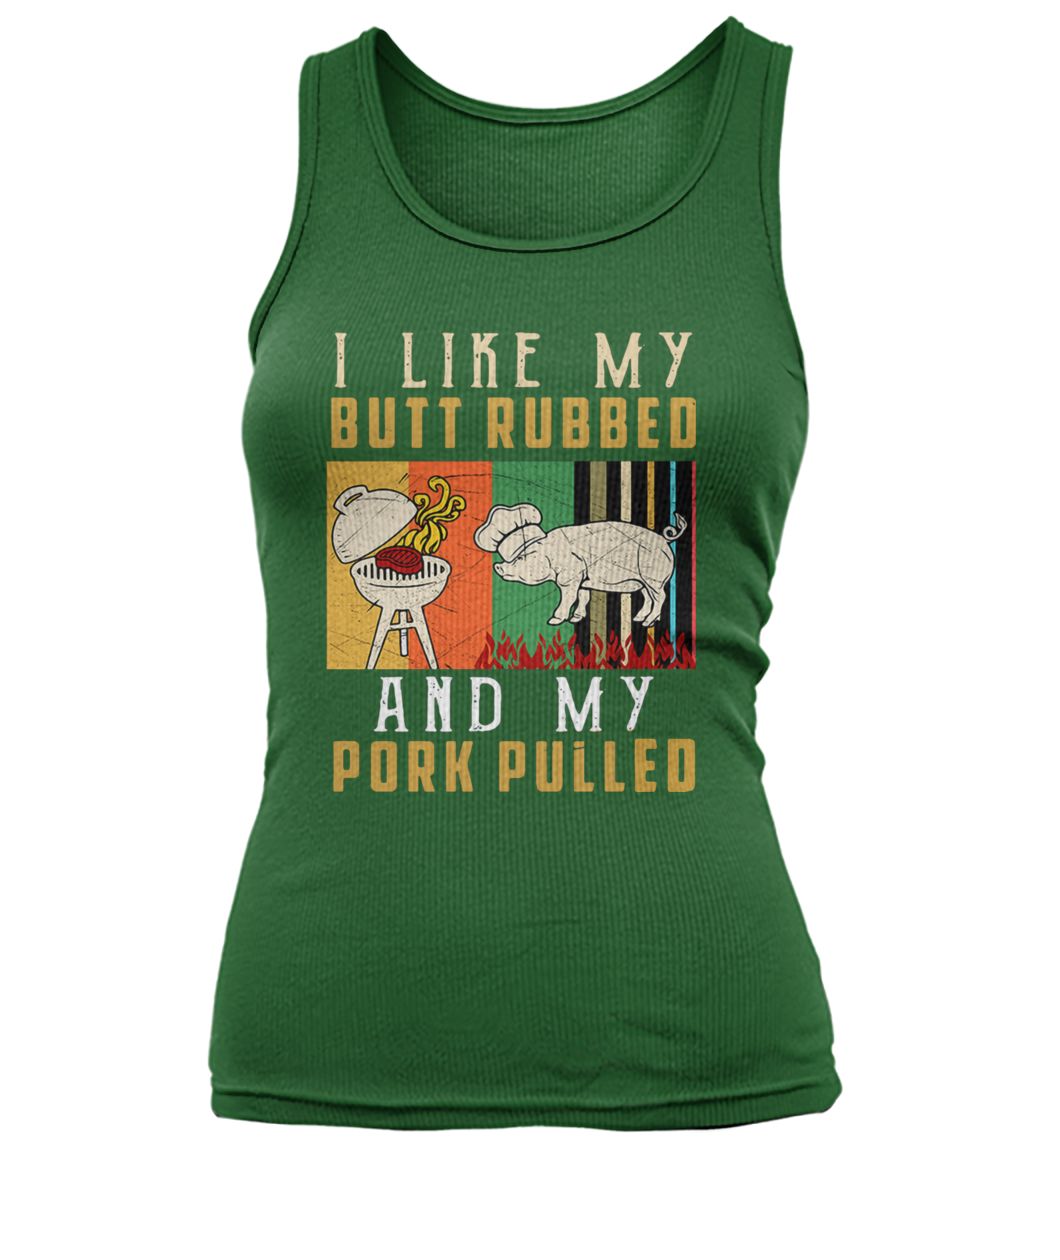 I like my butt rubbed and my pork pulled women's tank top